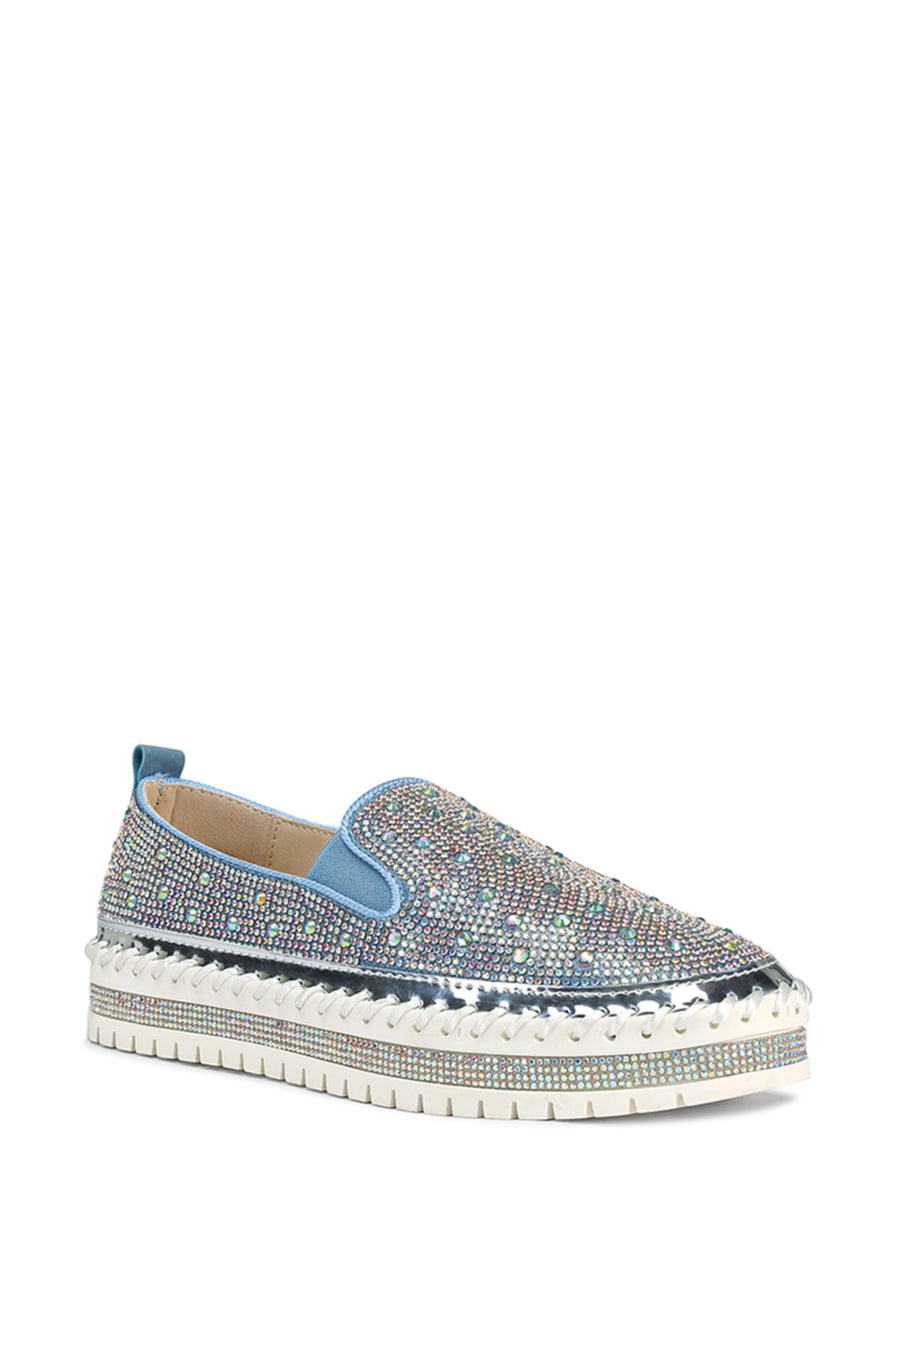 angled view of slip on light wash denim flat sneakers with crystal rhinestone embellishments and a white braided platform sole